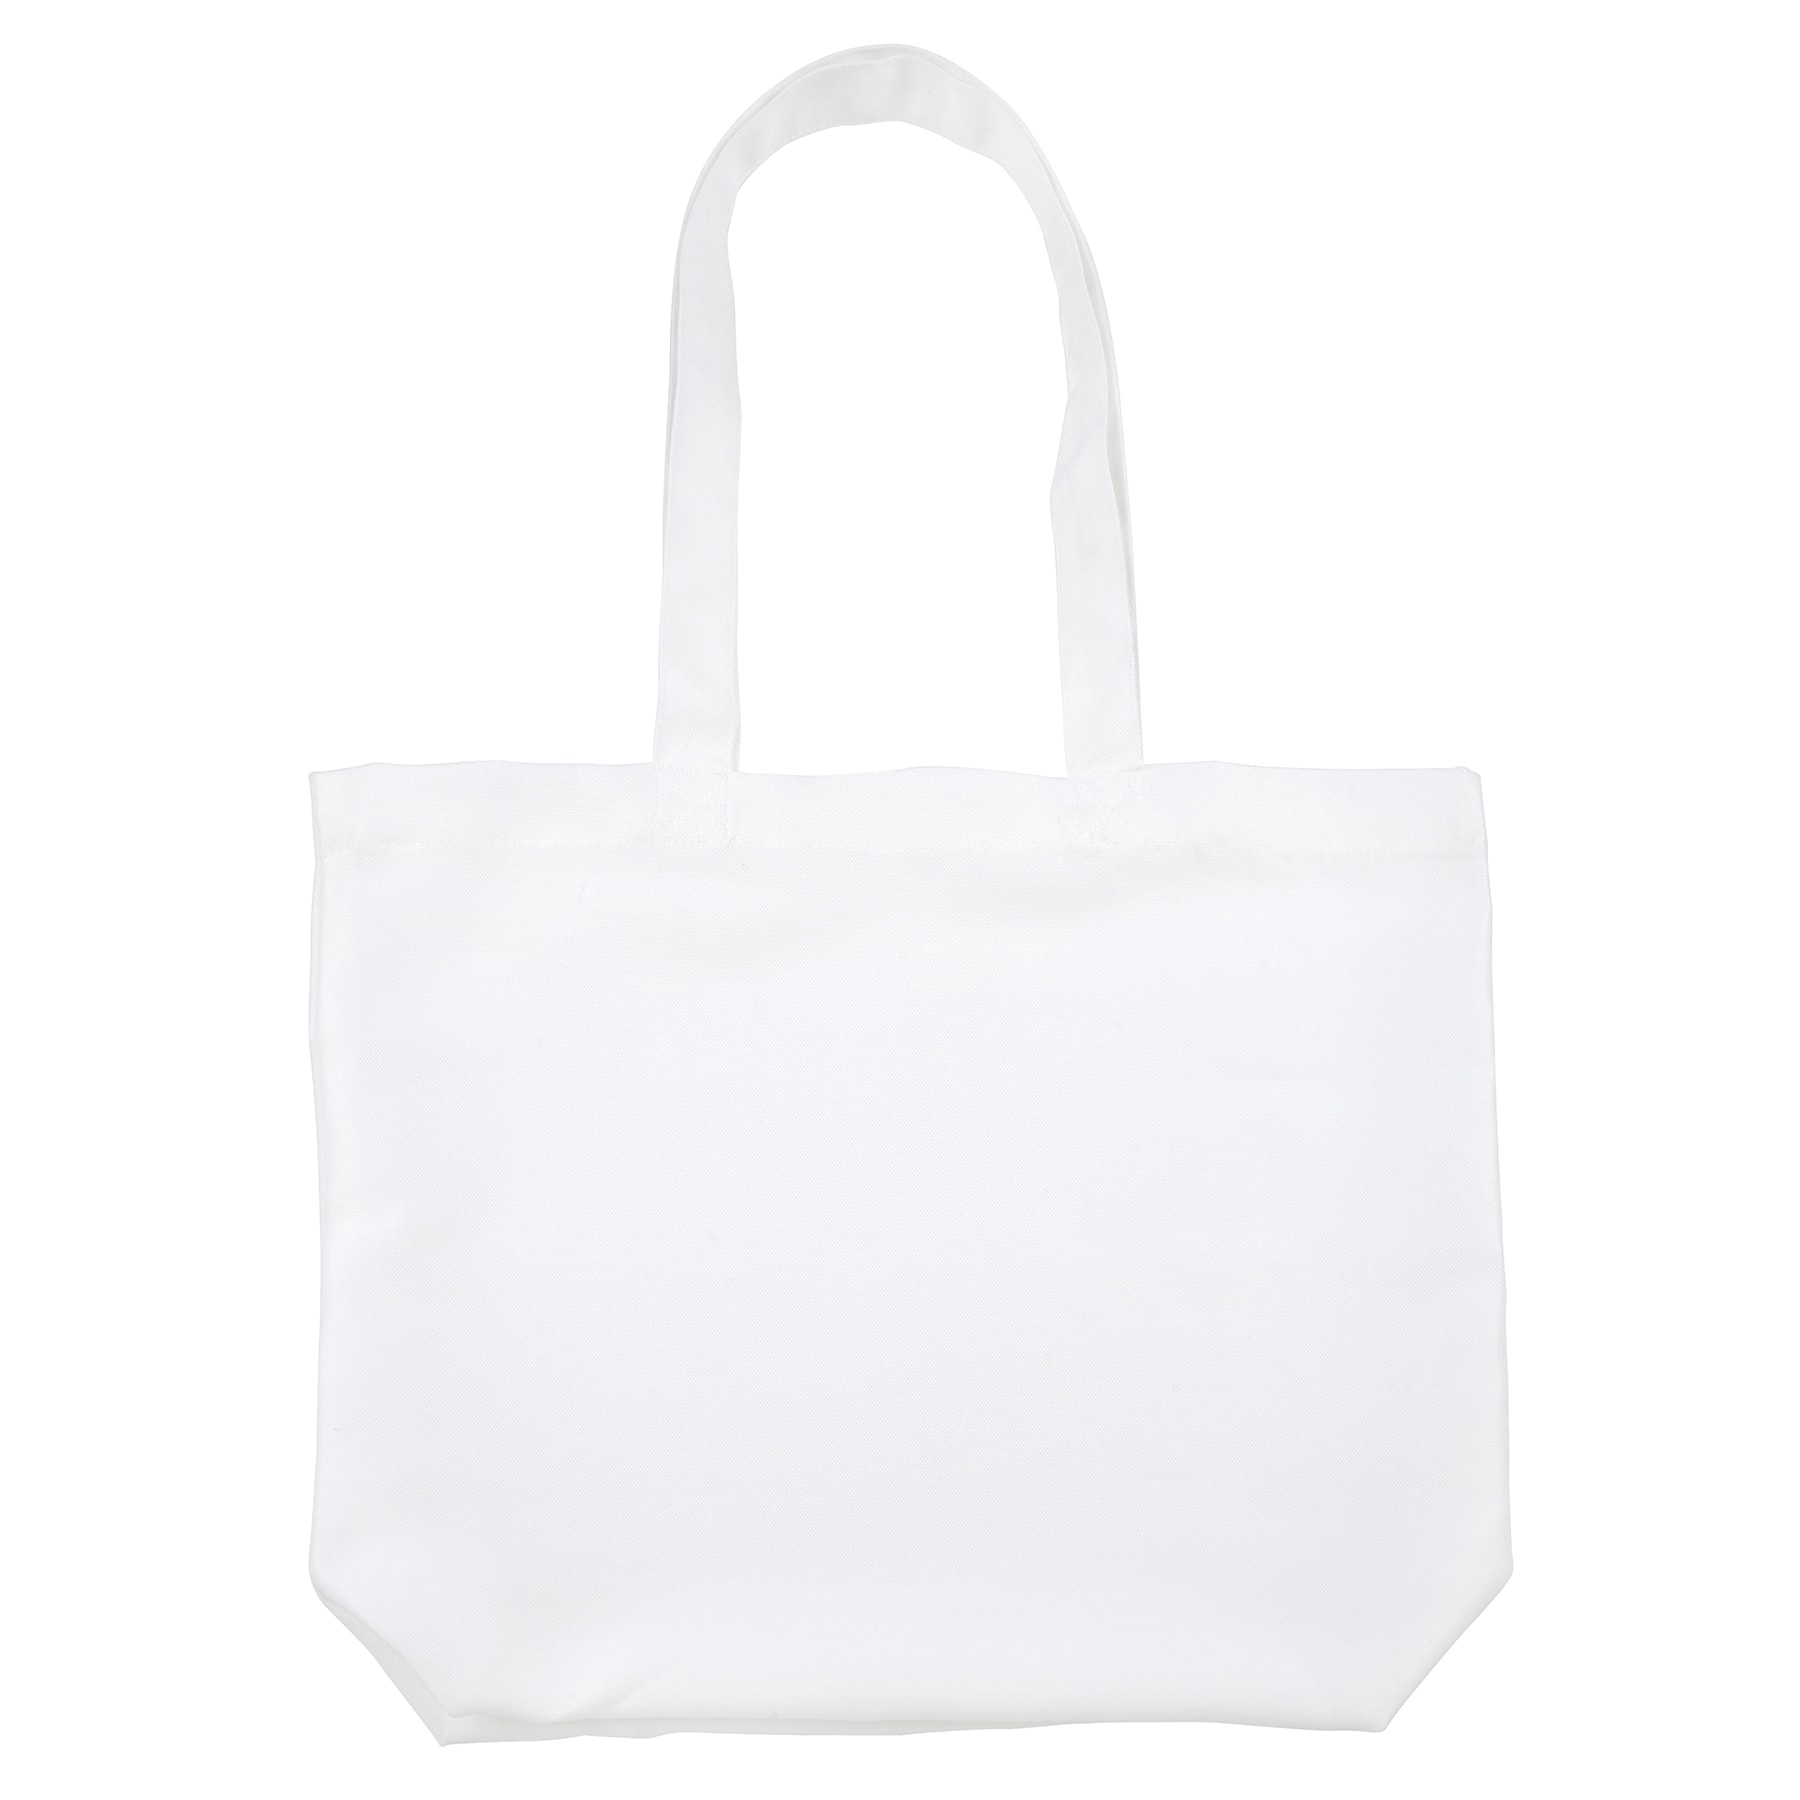 30 Pcs Blank Canvas Tote Bags Bulk with 1 Piece of PTFE Sheet for Iron on  Heat Transfer DIY Sublimation Tote Bags Shopping Bag for Crafts Natural